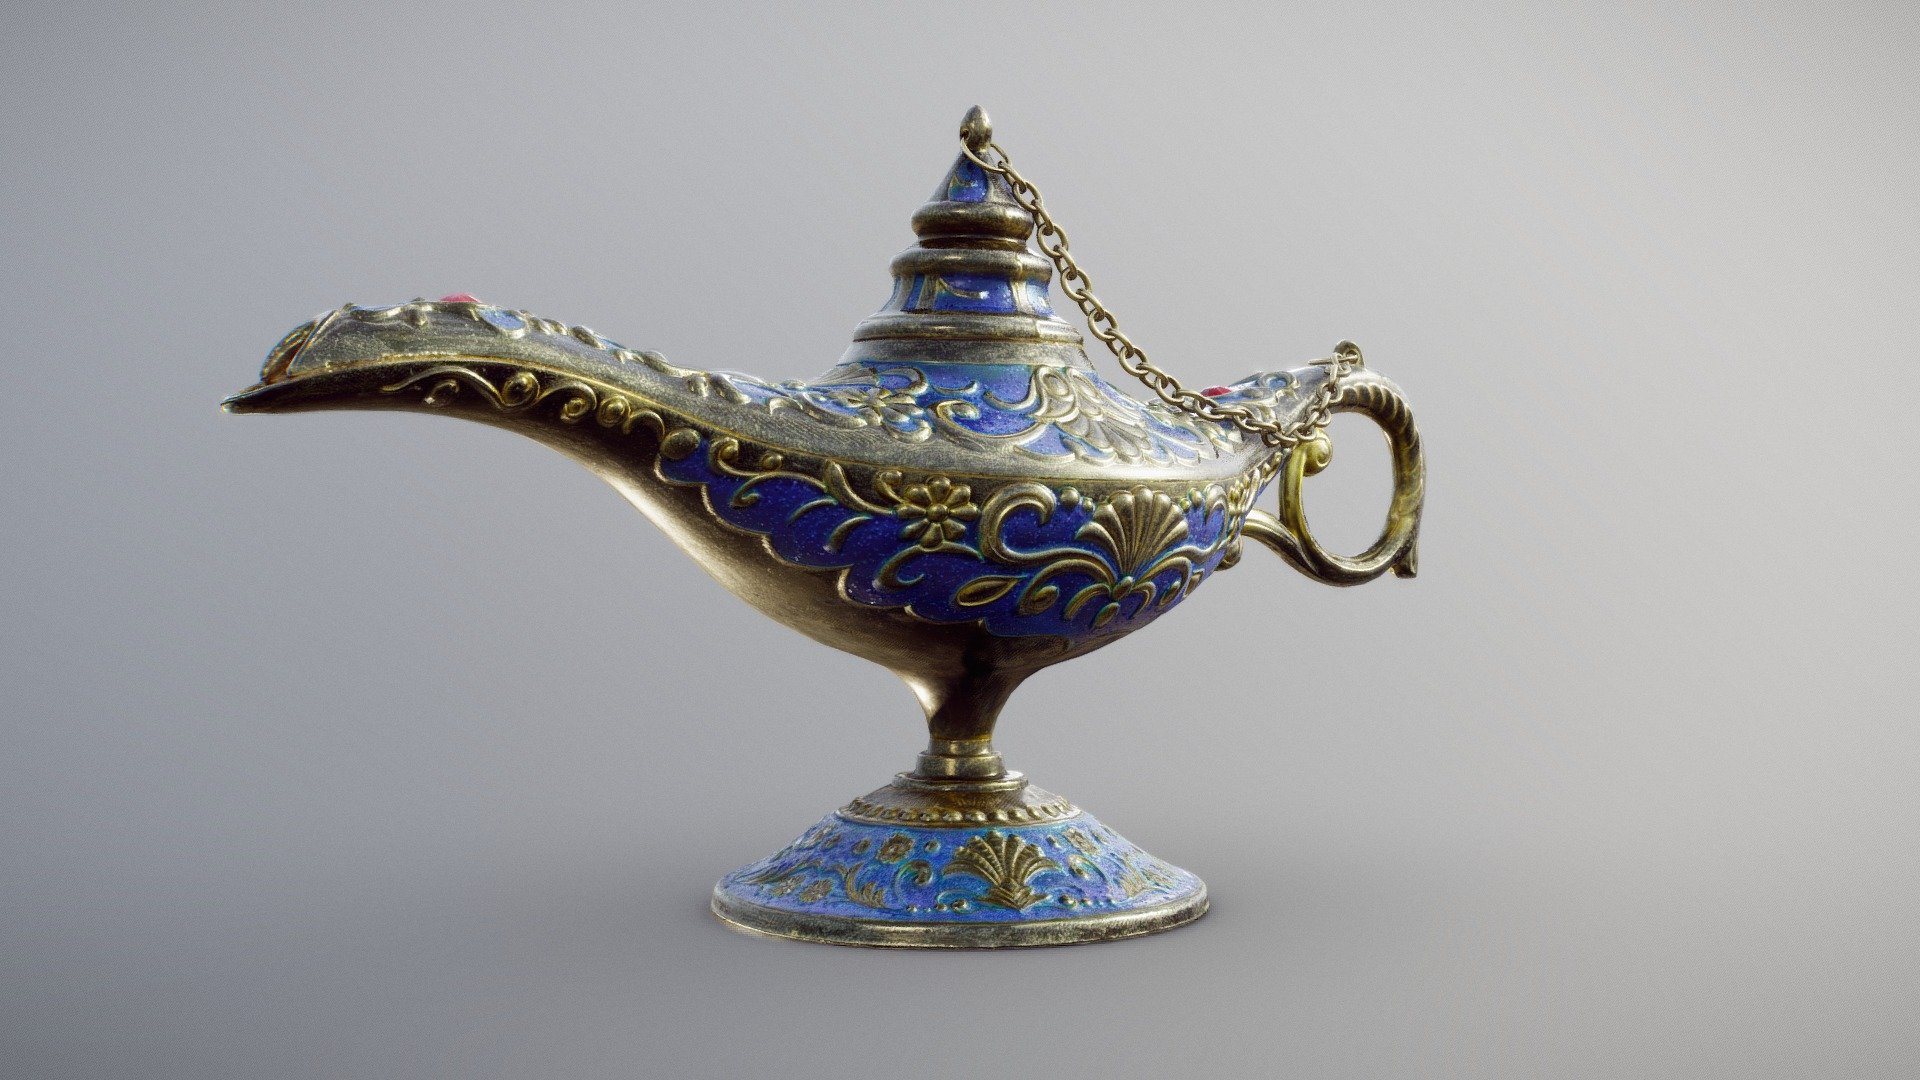 Decorative Aladdin Magic Lamp 

Classic Aladdin Magic Genie Lamp. Gold plated Zinc with blue accent and red Rubbies.

20.6 x 7.2 x 11.1 cm (14 micrometers per texel @ 8k)

Scanned using advanced technology developed by inciprocal Inc. that enables highly photo-realistic reproduction of real-world products in virtual environments. Our hardware and software technology combines advanced photometry, structured light, photogrammtery and light fields to capture and generate accurate material representations from tens of thousands of images targeting real-time and offline path-traced PBR compatible renderers.

Zip file includes low-poly OBJ mesh (in meters) with a set of 8k PBR textures compressed with lossless JPEG (no chroma sub-sampling) 3d model